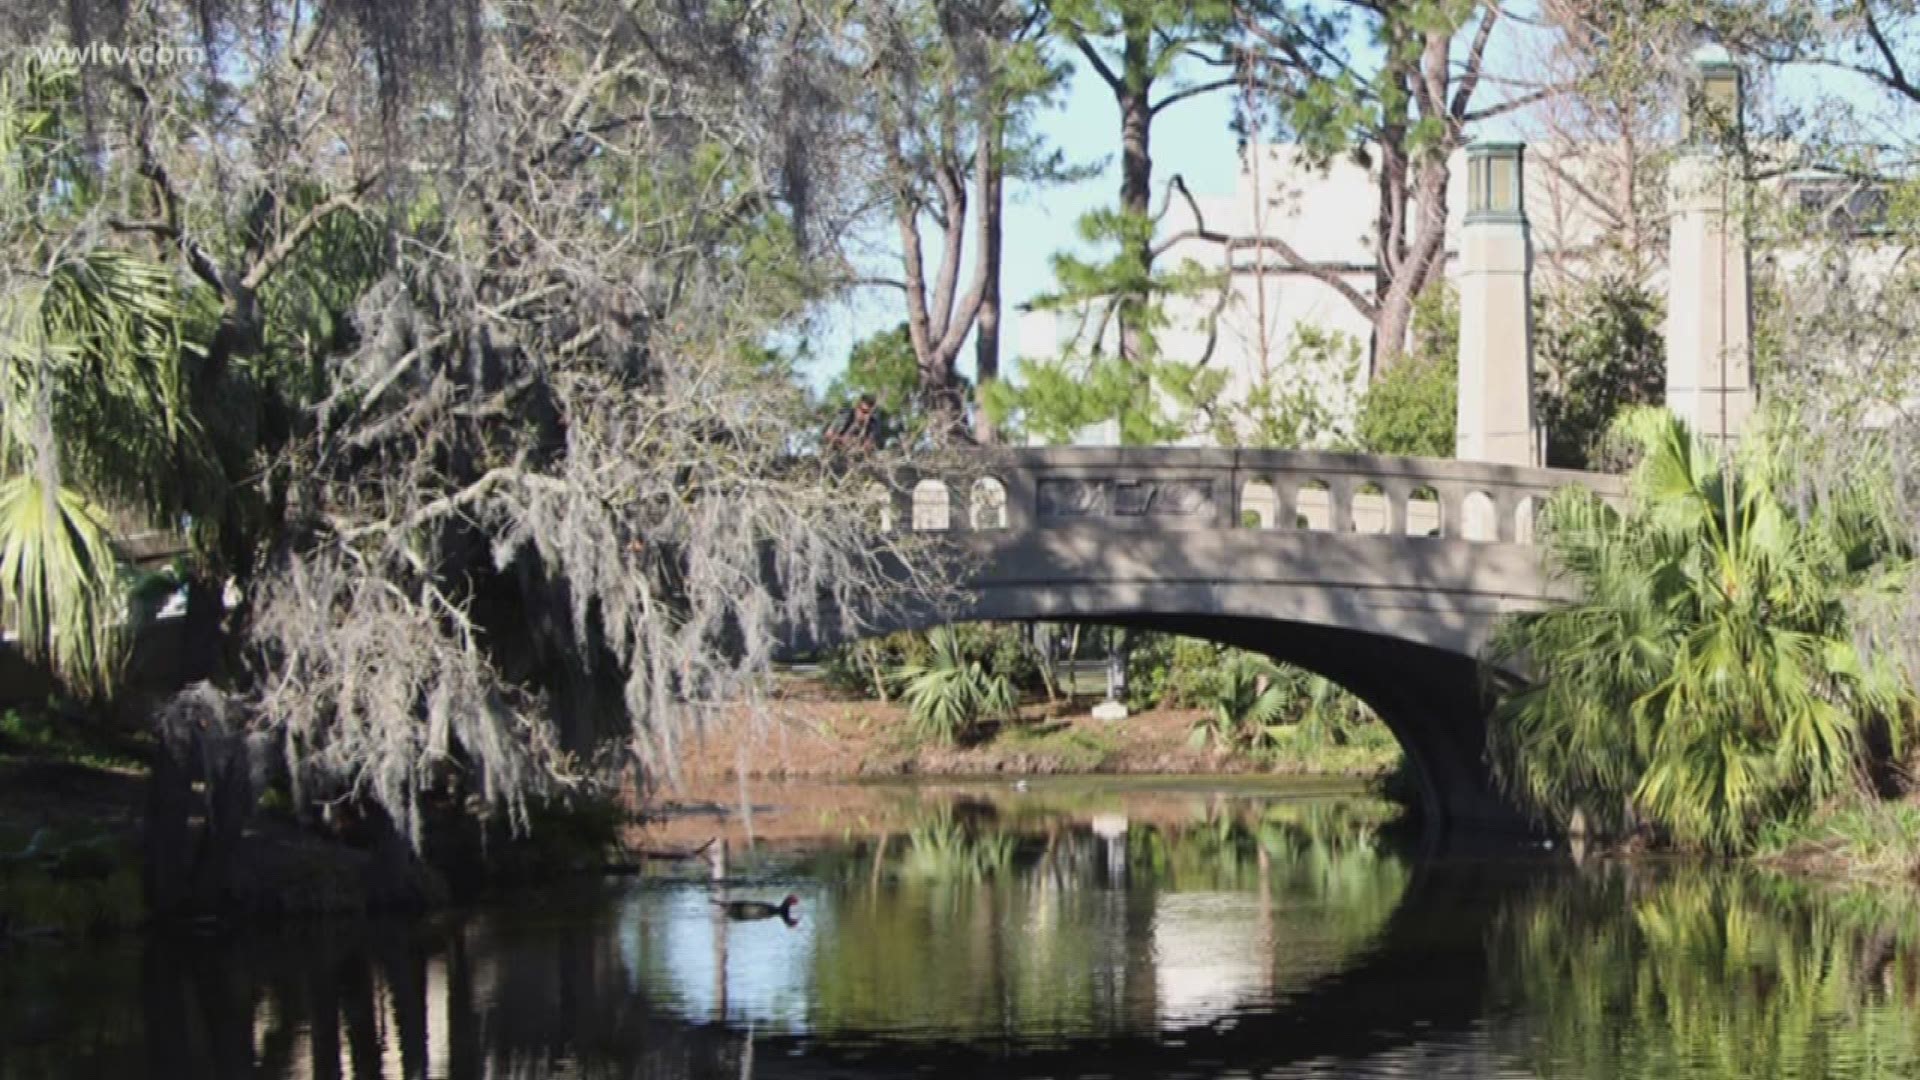 Buzzfeed article names New Orleans' City Park among world's best parks.